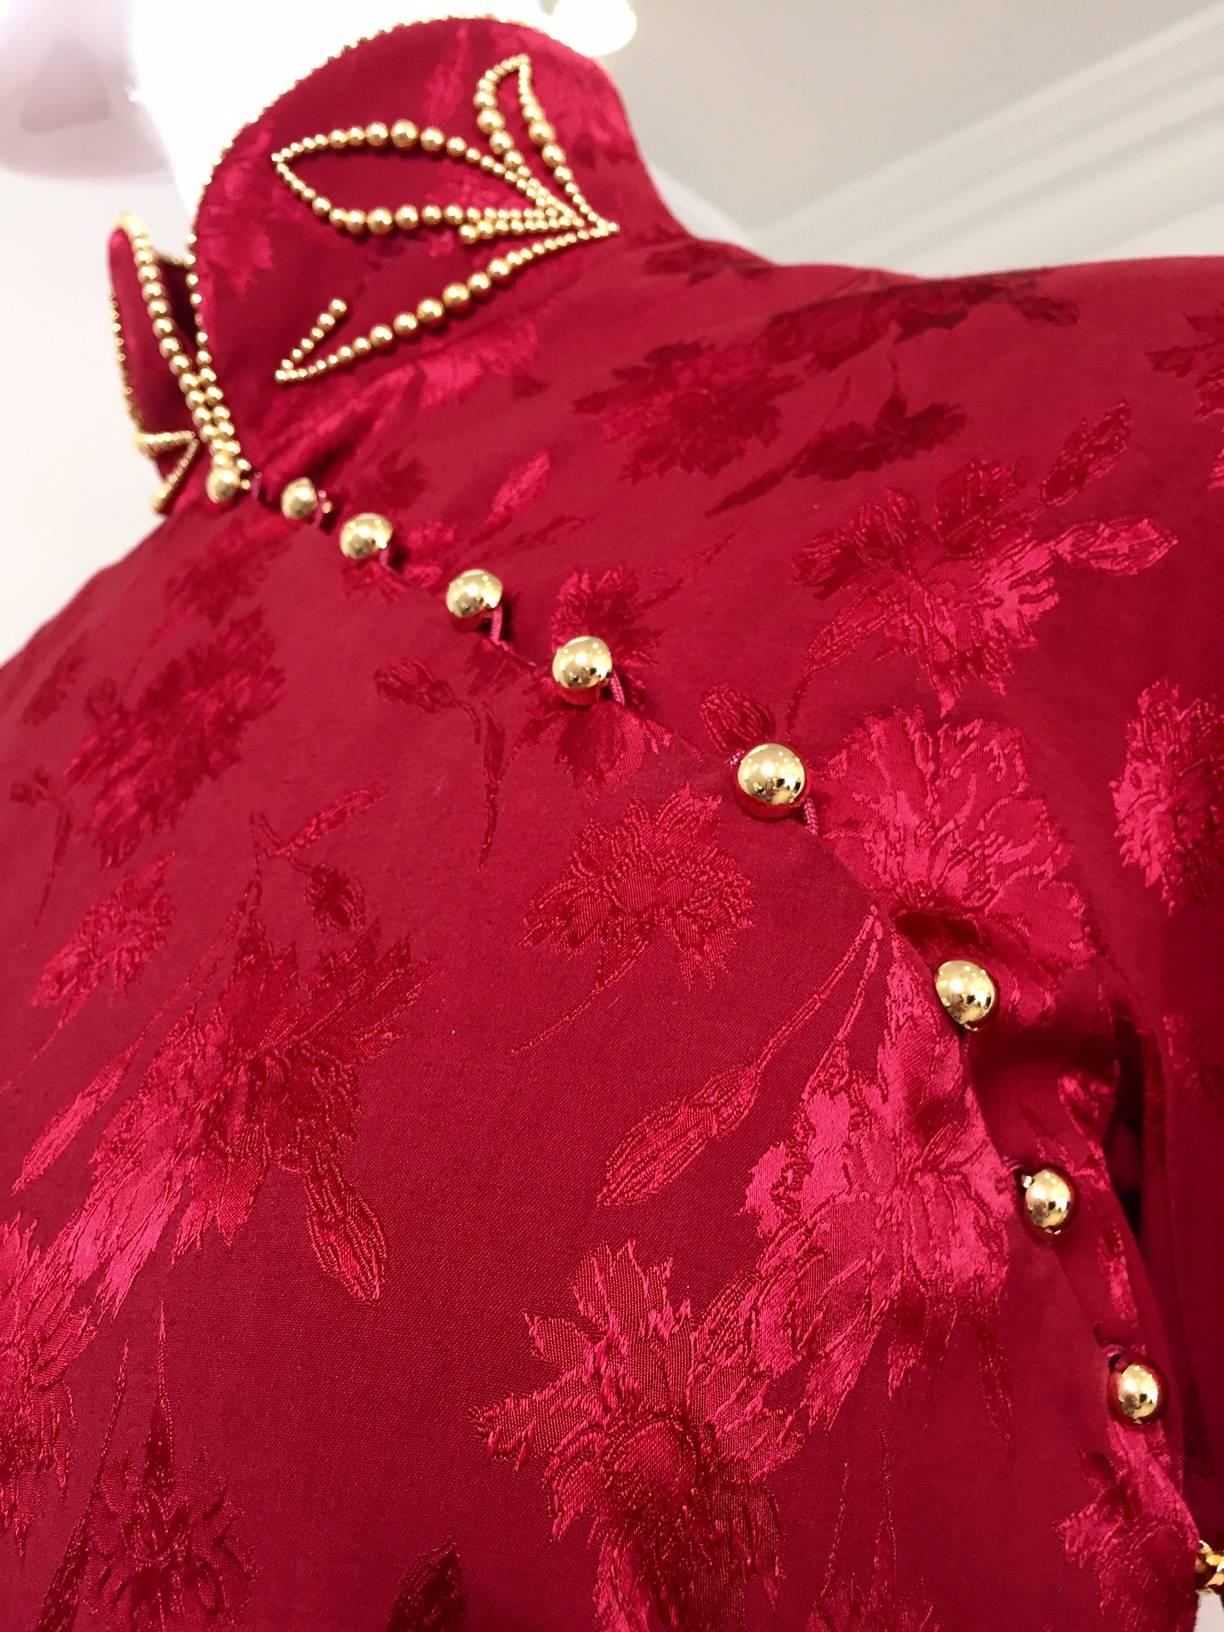 Iconic gown designed by john galliano for House of Dior from fall 1997 collection. Gown is embroidered with faux pearl beads. ( See runway image)  
chinese cheongsam inspired dress. Must have for vintage collector or museum.
Bust: 34"/ Waist: